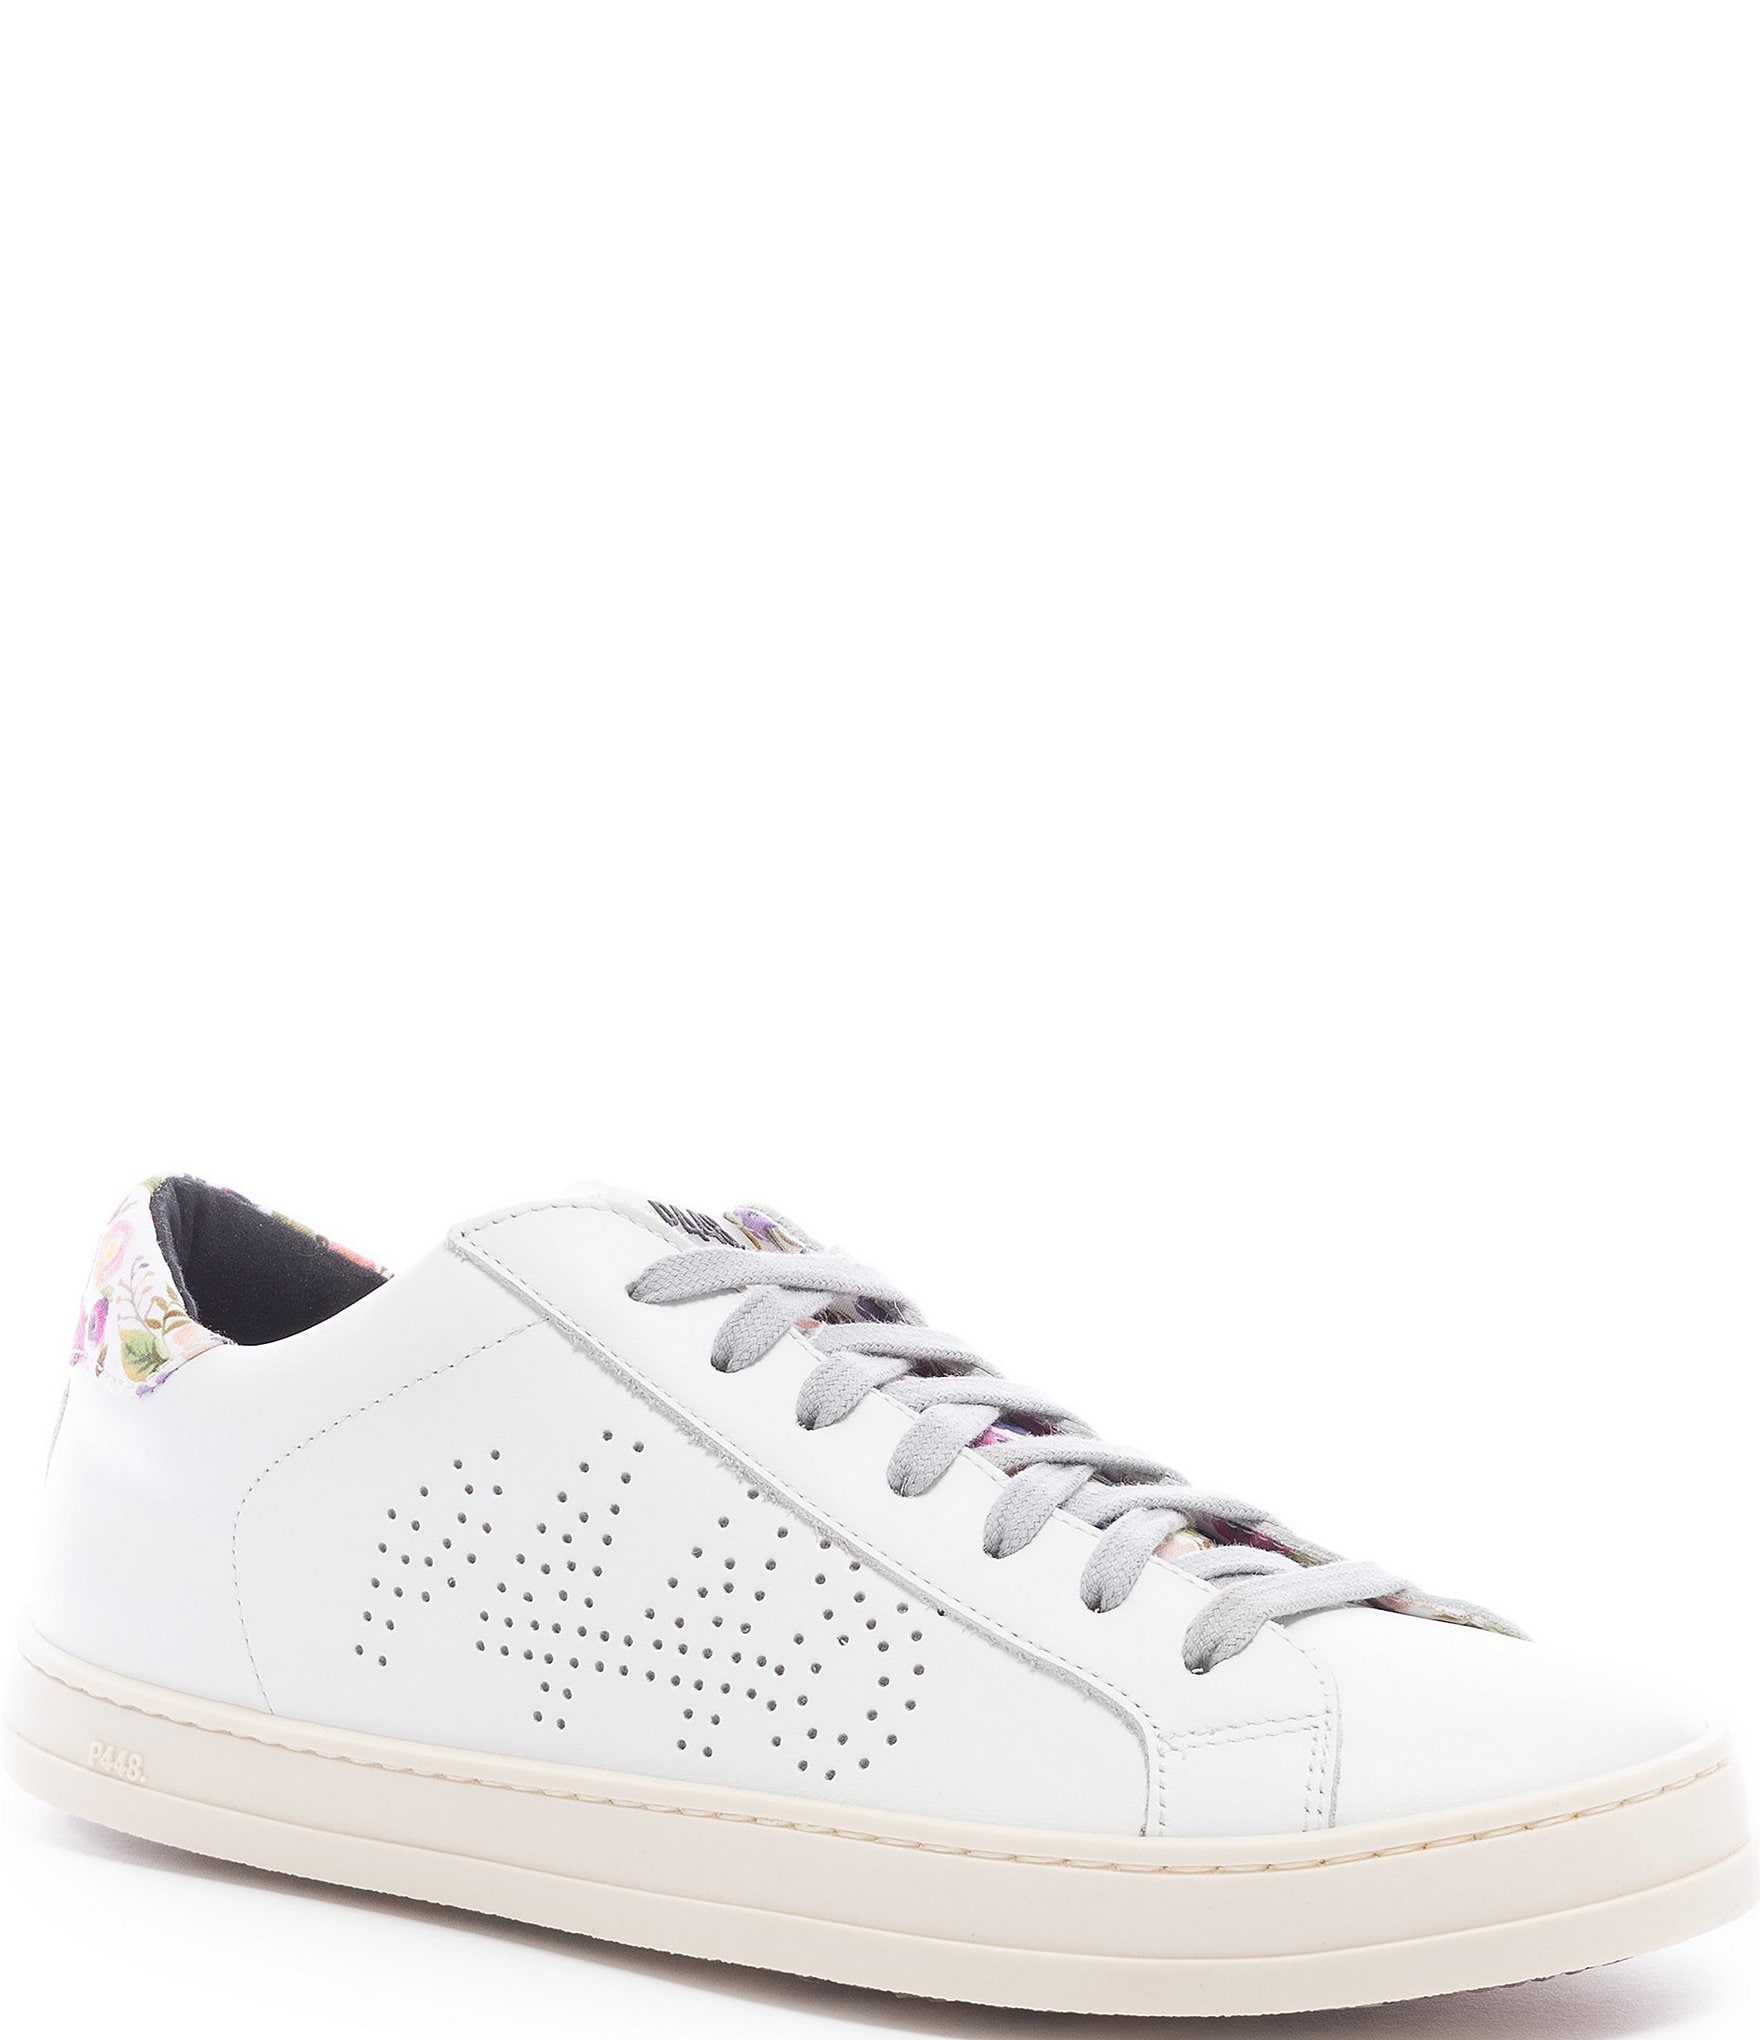 P448 John Floral Leather Lace-Up Sneakers | Dillard's